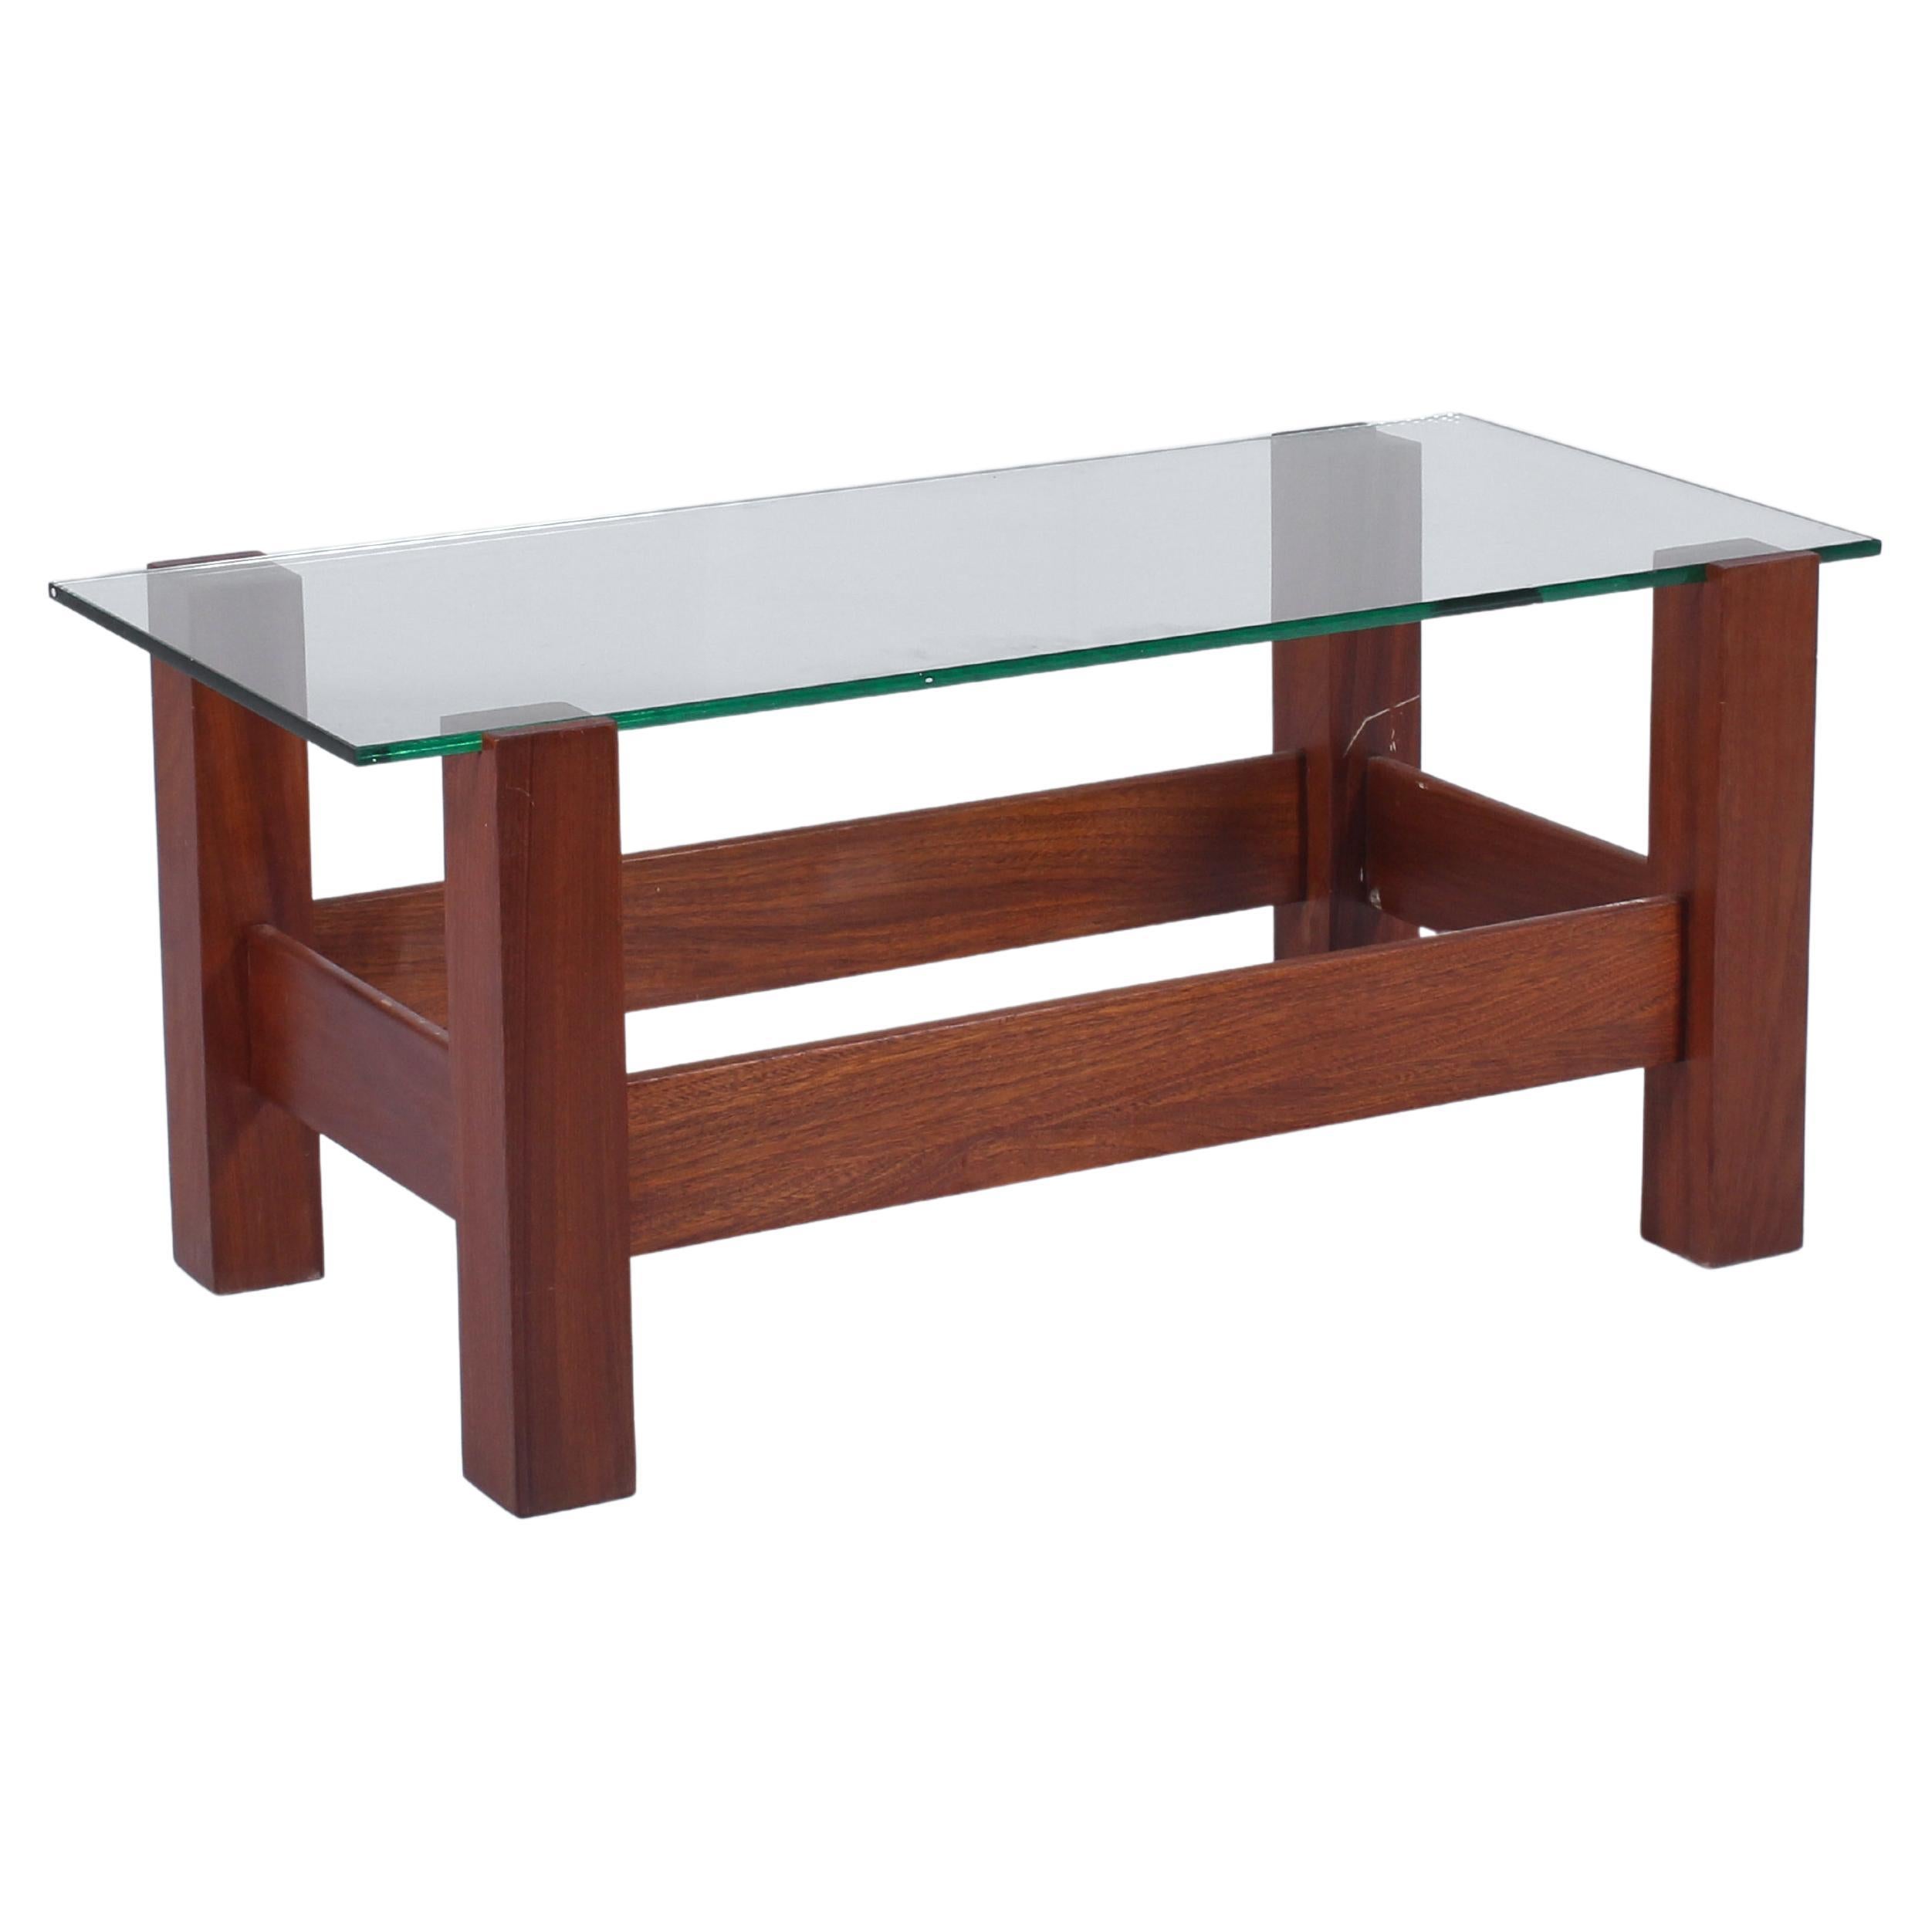 Midcentury Fontana Arte Style Wood and Glass Coffee Table 60s, Italy